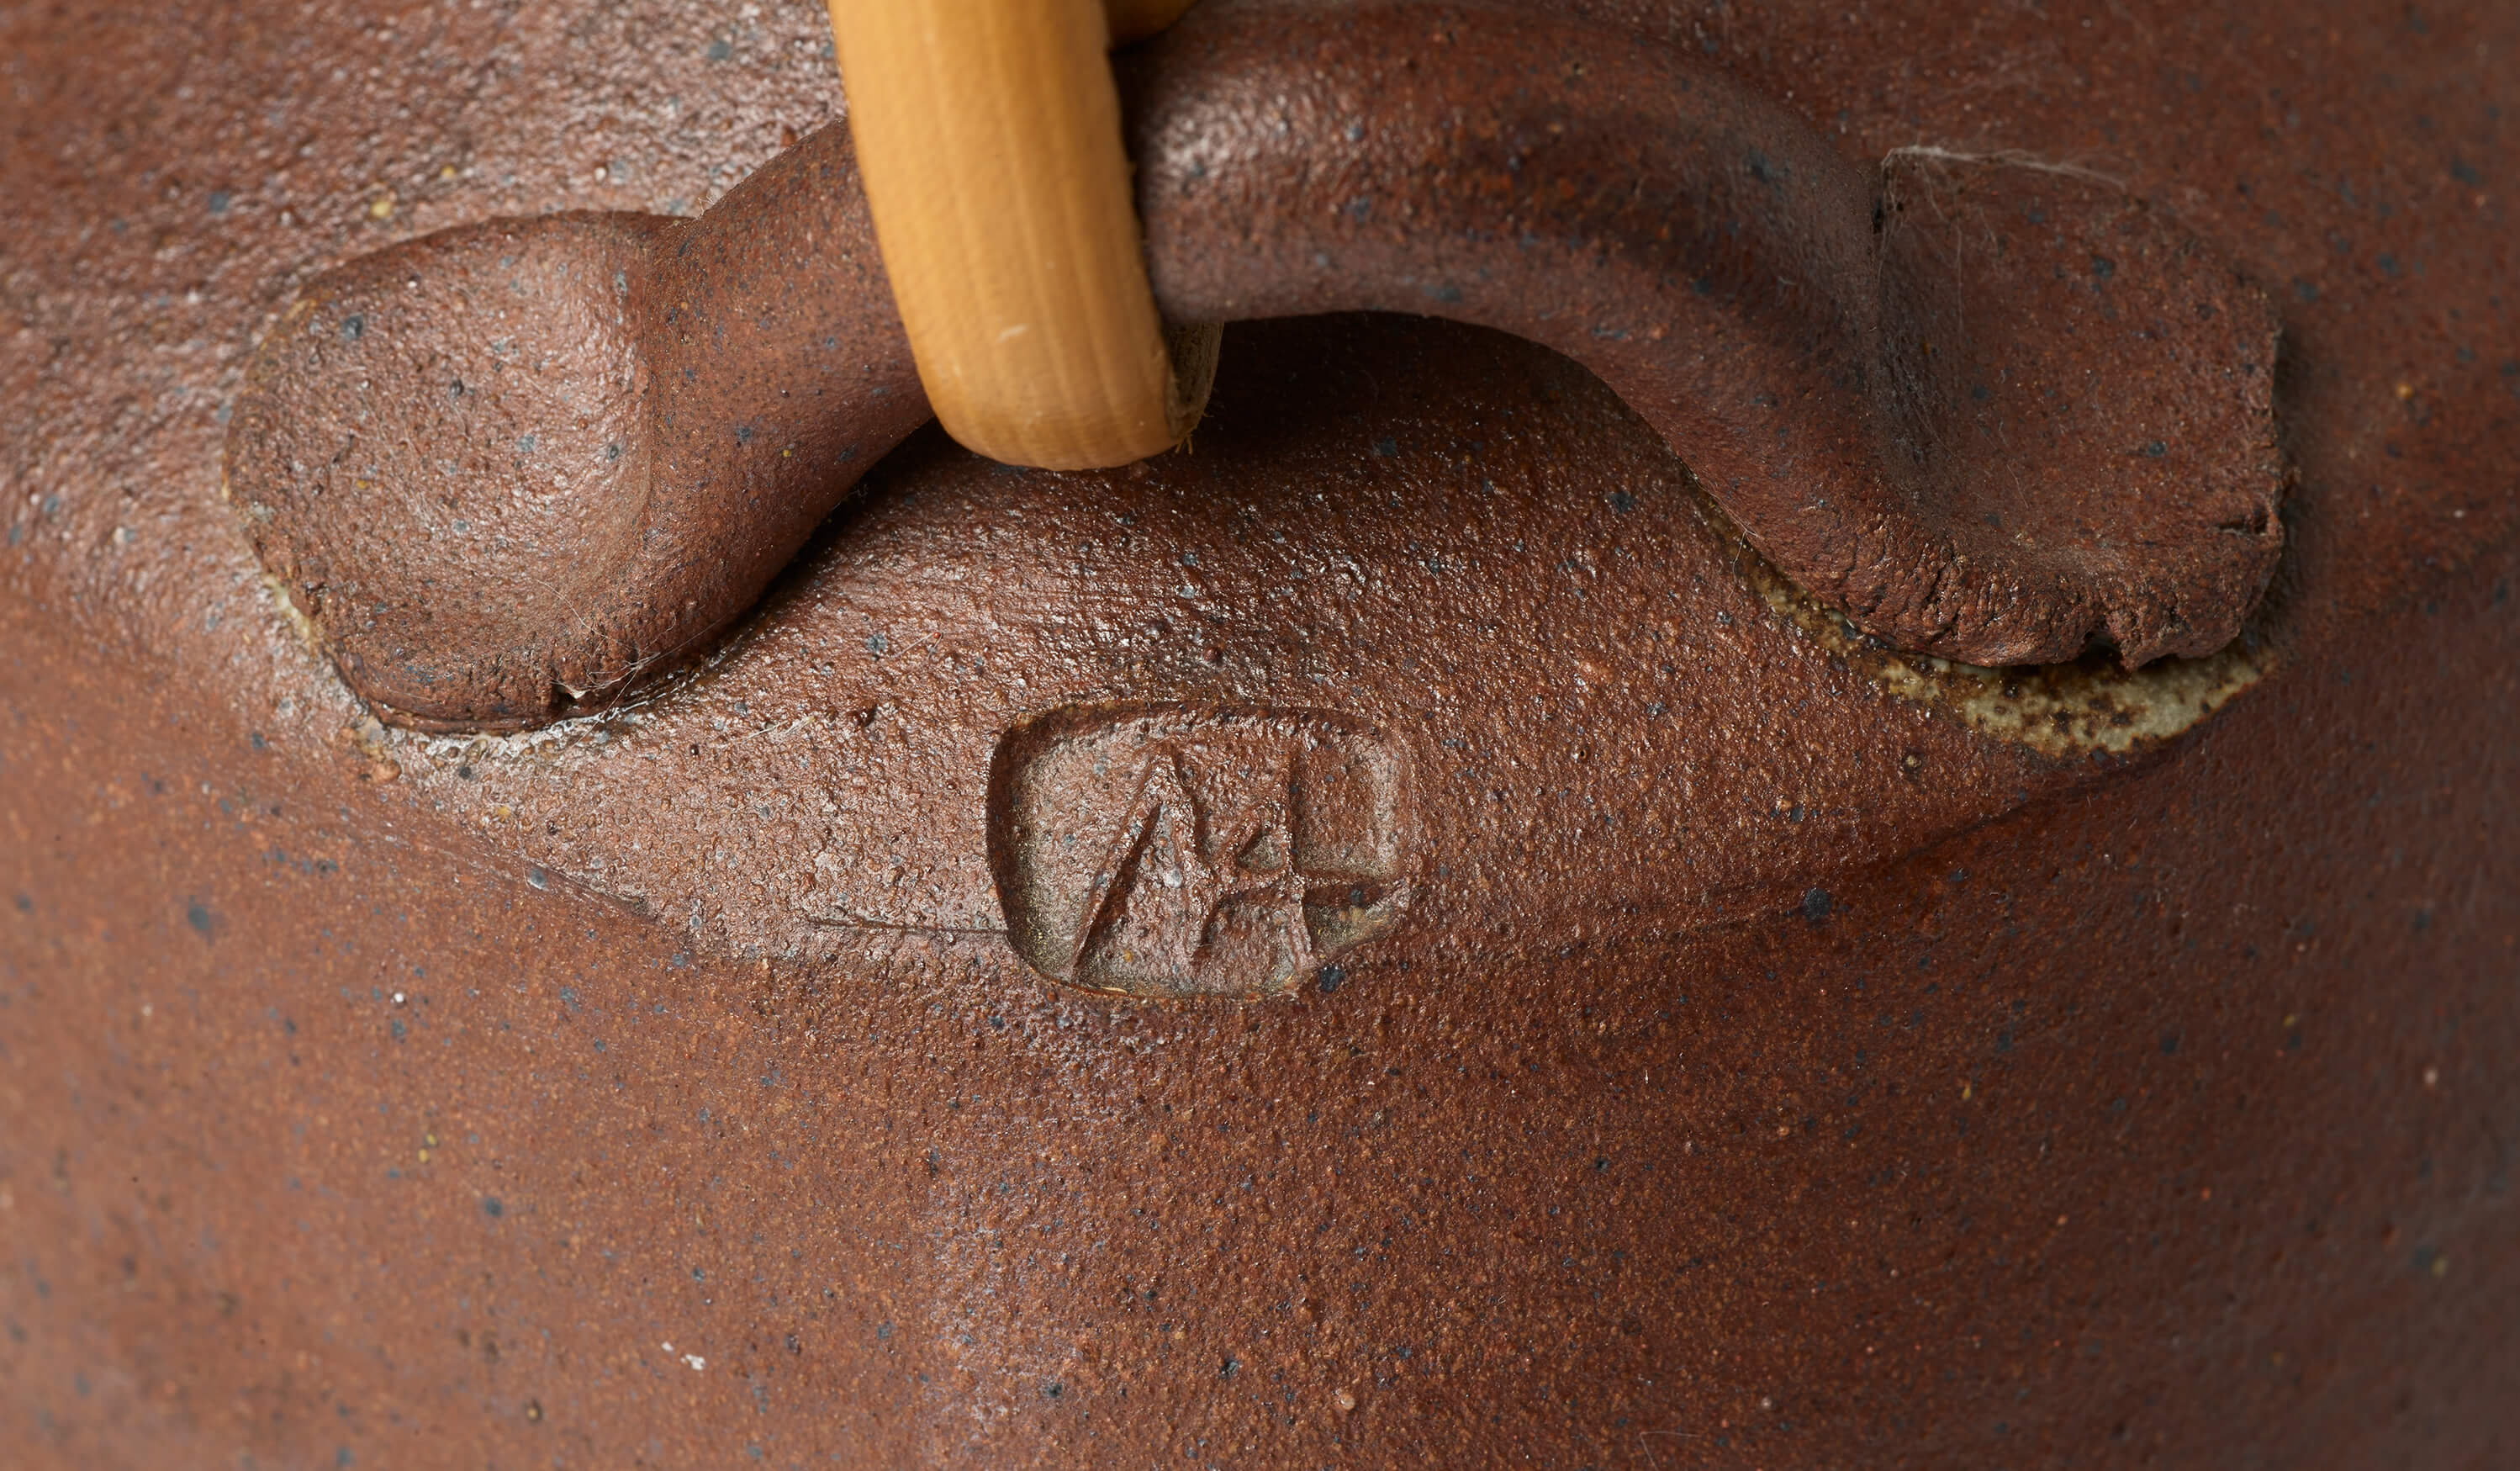 Detail of attached handle. Letter “M” is impressed into the clay. Accession number is visible.